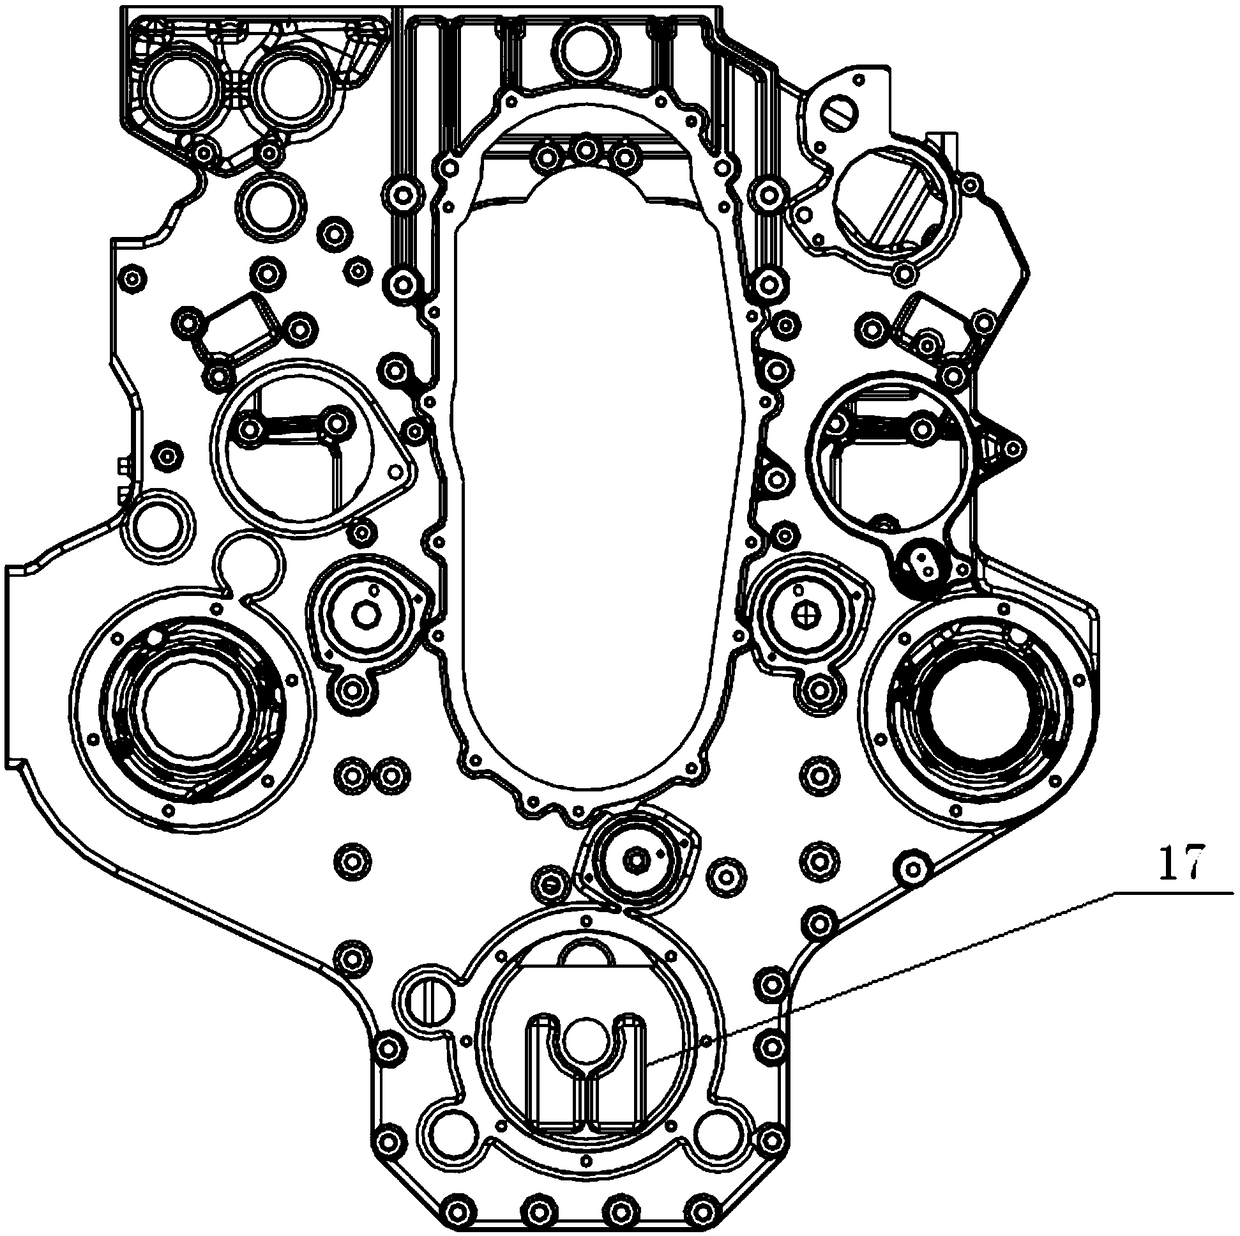 Built-in installation structure of an engine and its oil pump